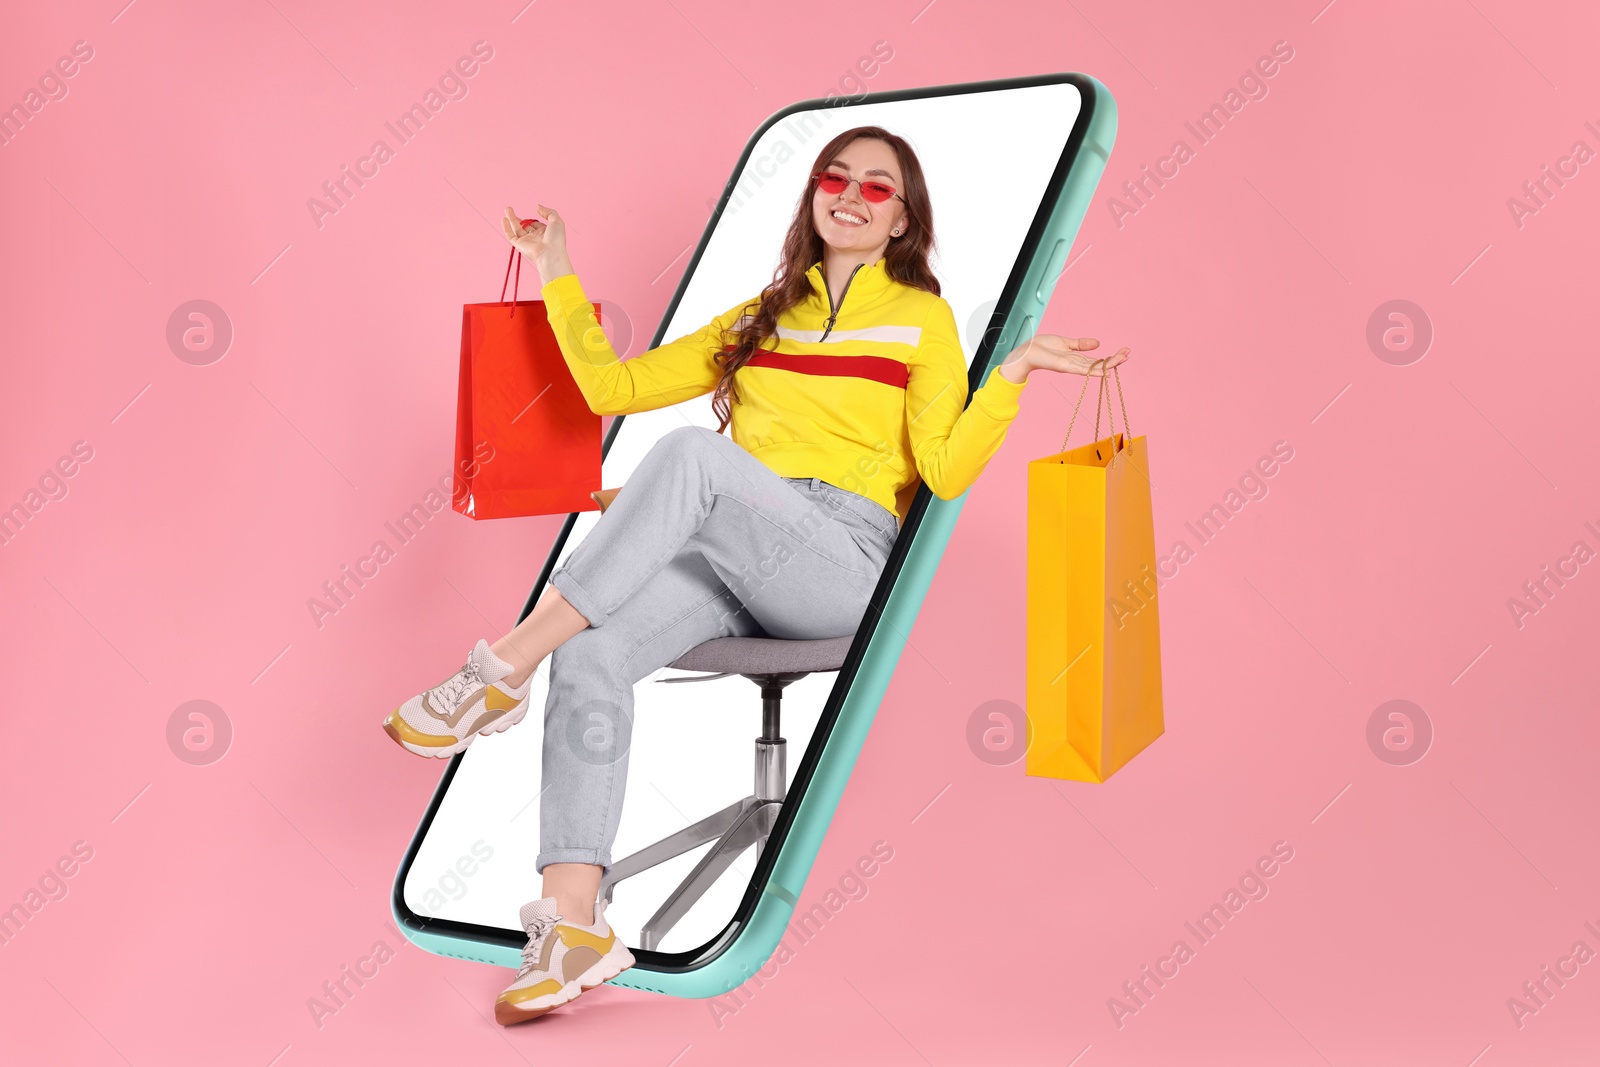 Image of Online shopping. Happy woman with paper bags on chair looking out from smartphone against pink background